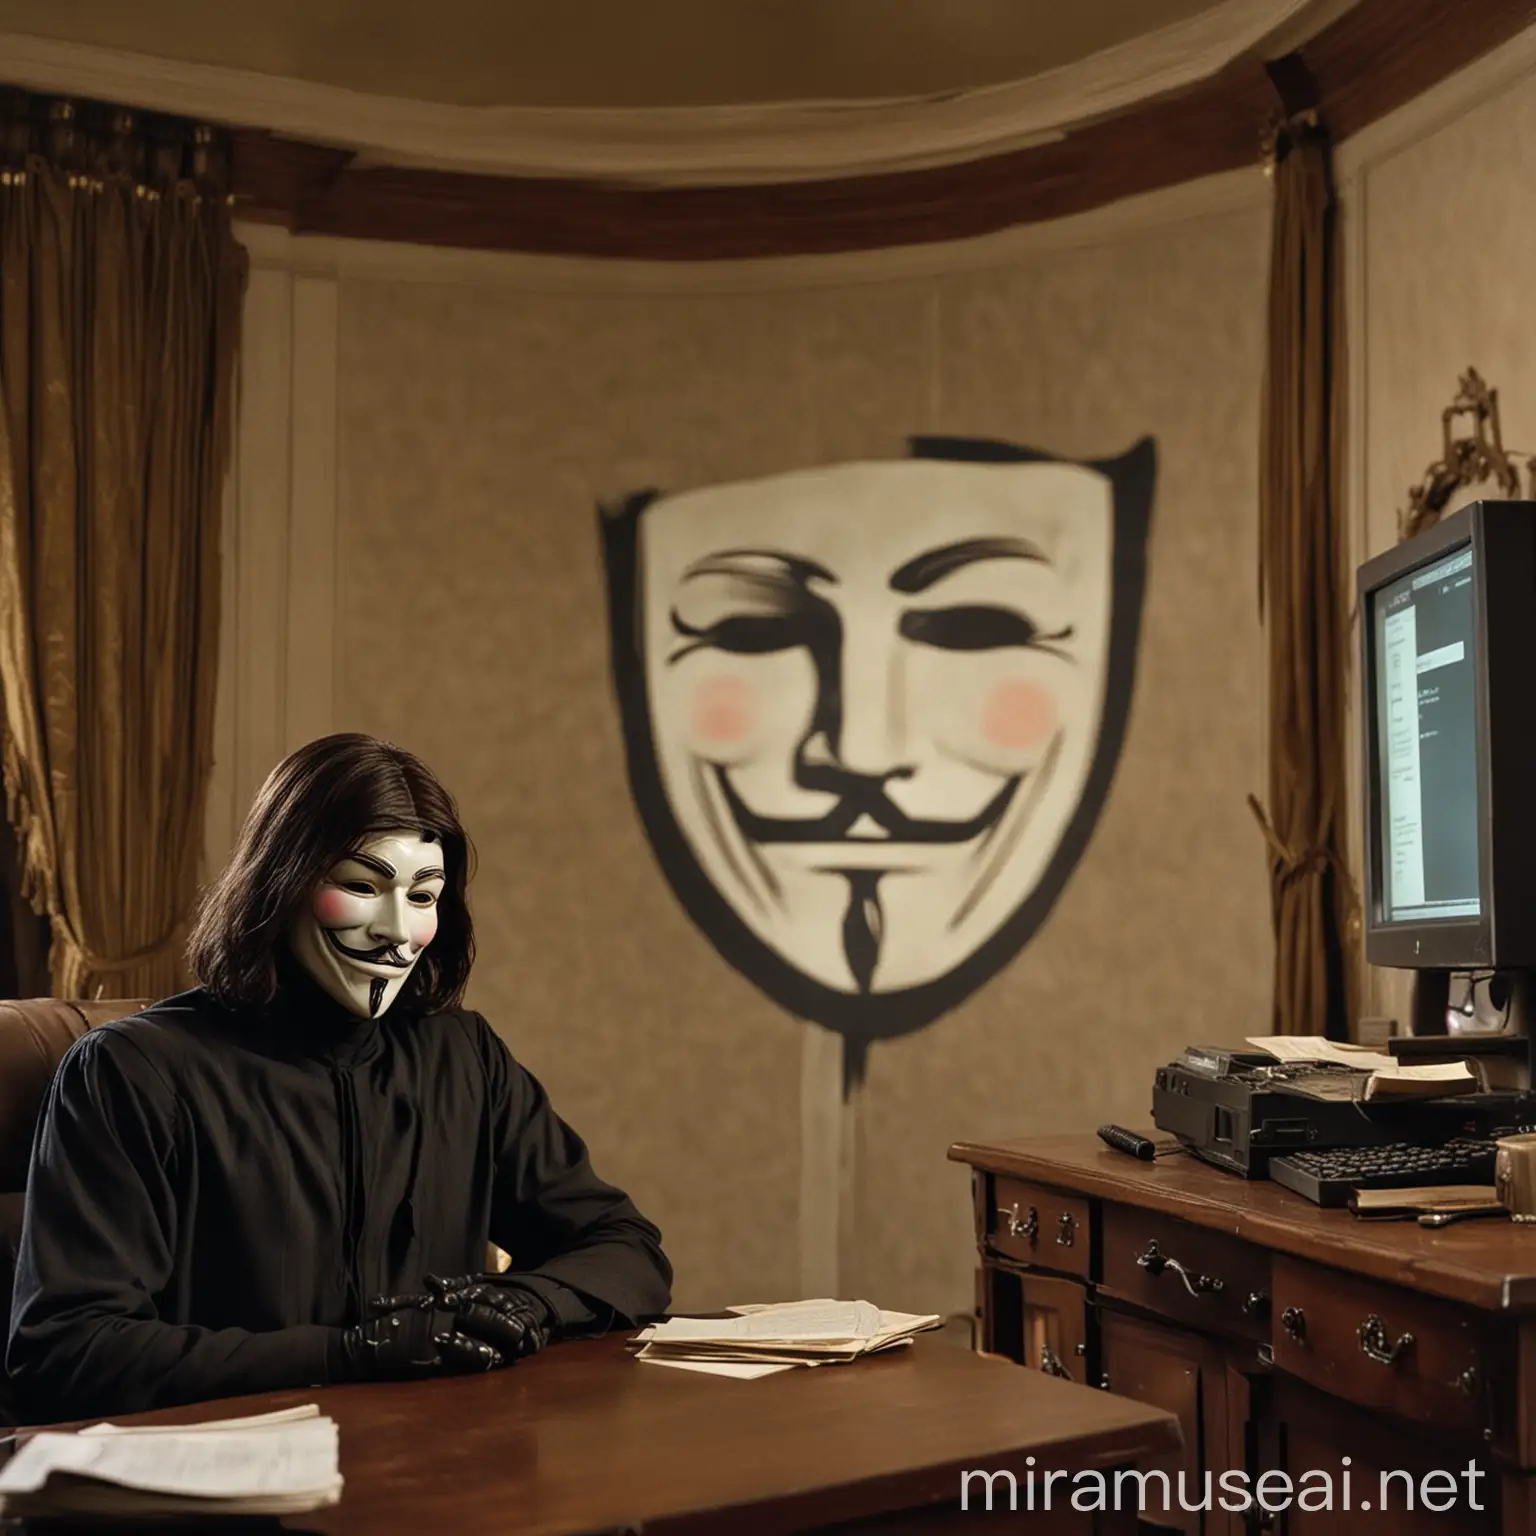 V for Vendetta Relaxing in Opulent Surroundings with Telegram Displayed on Computer Screen